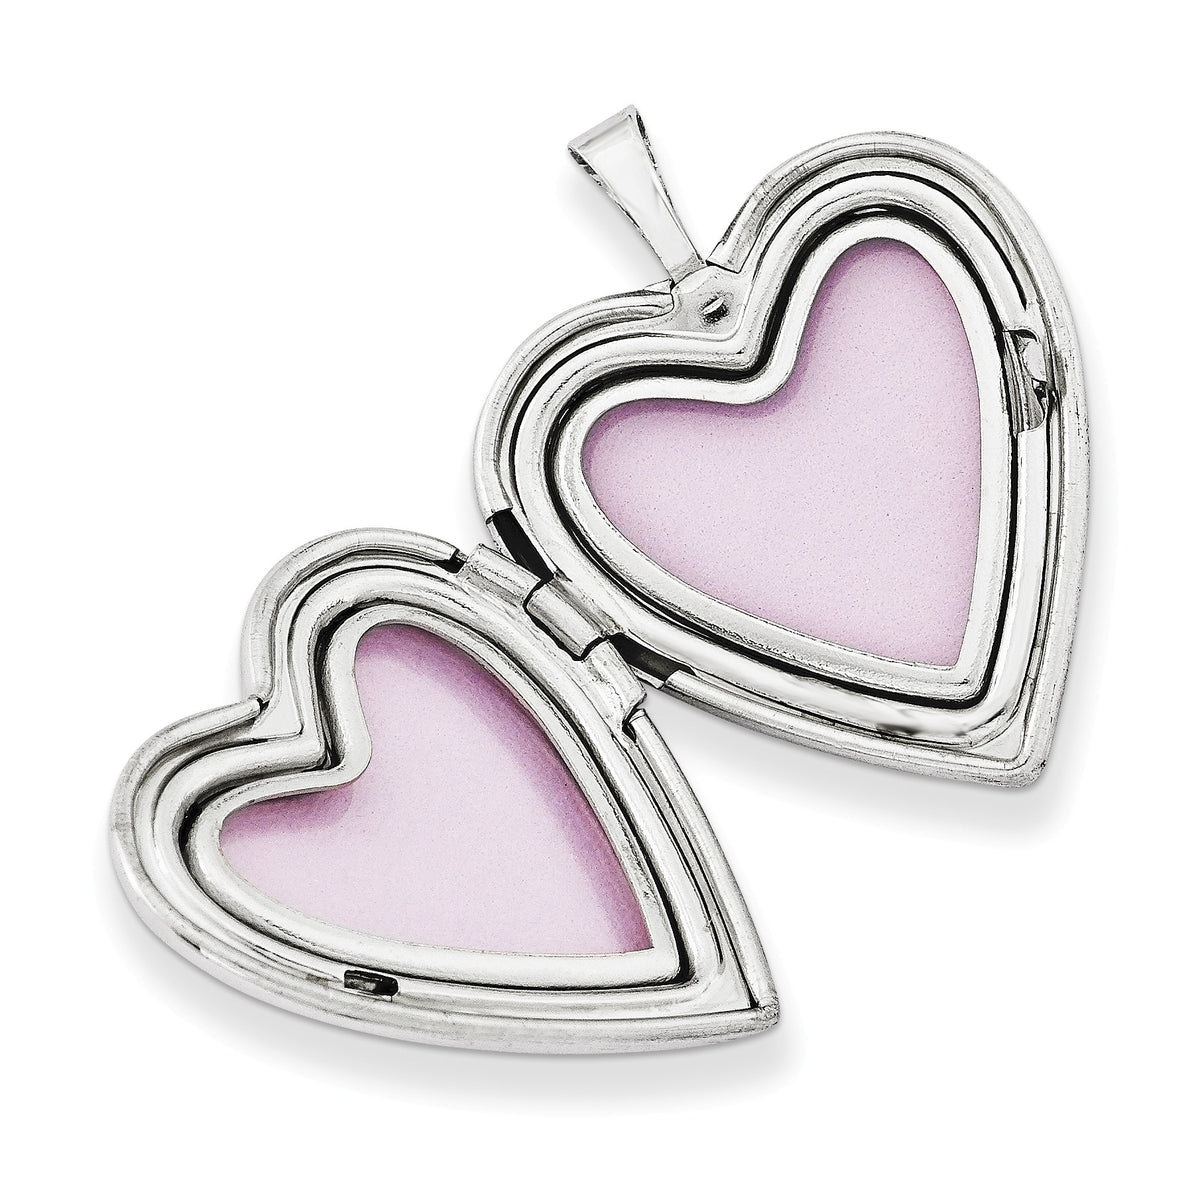 Alternate view of the Sterling Silver 20mm Diamond Cut Grandma Heart Locket by The Black Bow Jewelry Co.